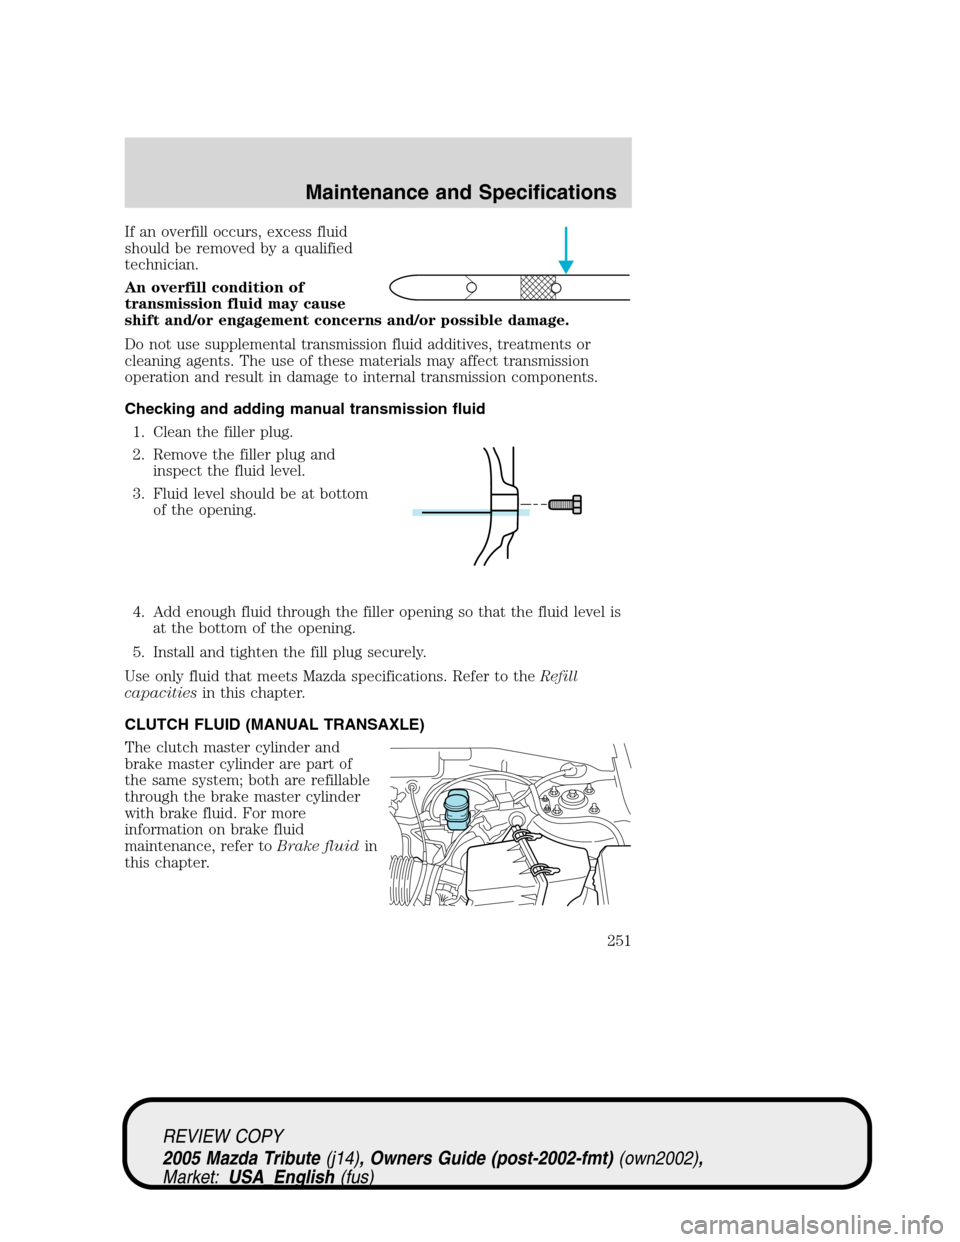 MAZDA MODEL TRIBUTE 2005  Owners Manual (in English) If an overfill occurs, excess fluid
should be removed by a qualified
technician.
An overfill condition of
transmission fluid may cause
shift and/or engagement concerns and/or possible damage.
Do not u